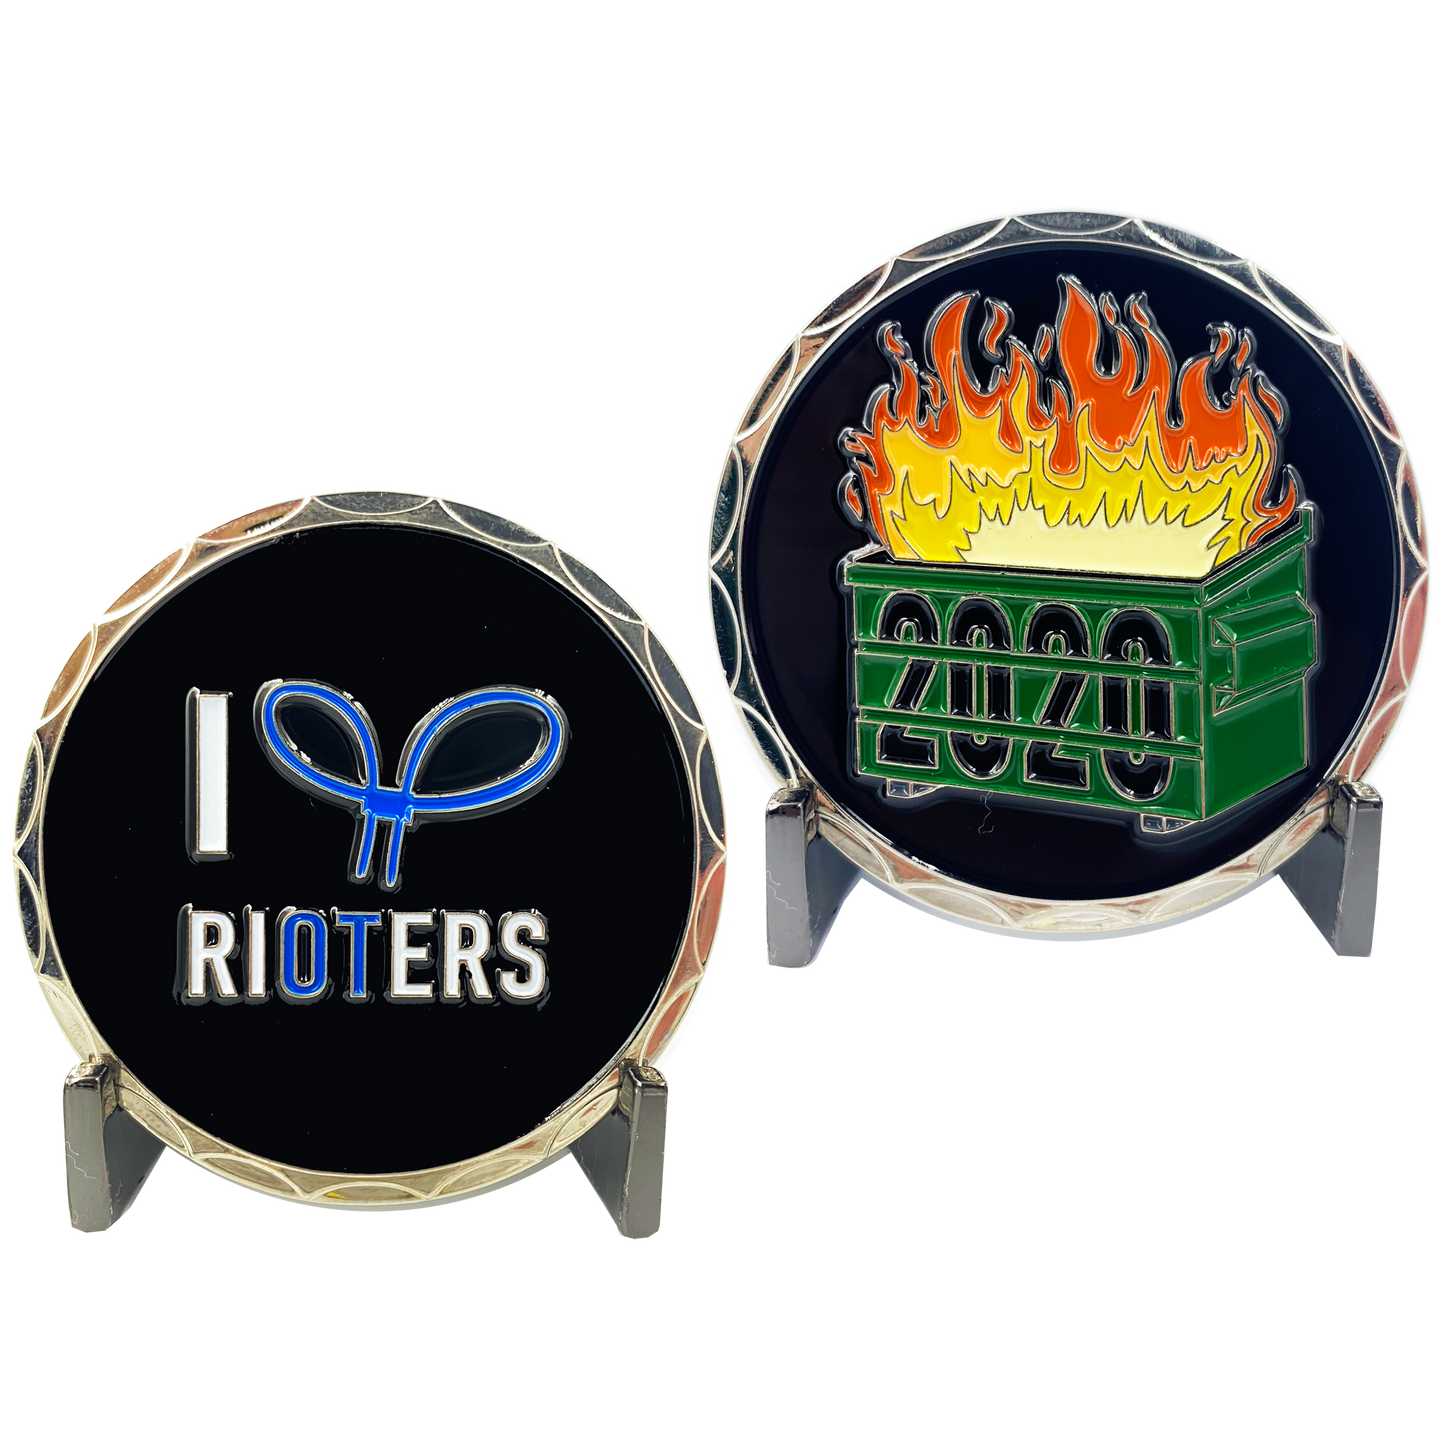 DL2-04 I Love Rioters 2020 Dumpster Fire Handcuff Zip Ties Police Thin Blue Line Overtime Challenge Coin